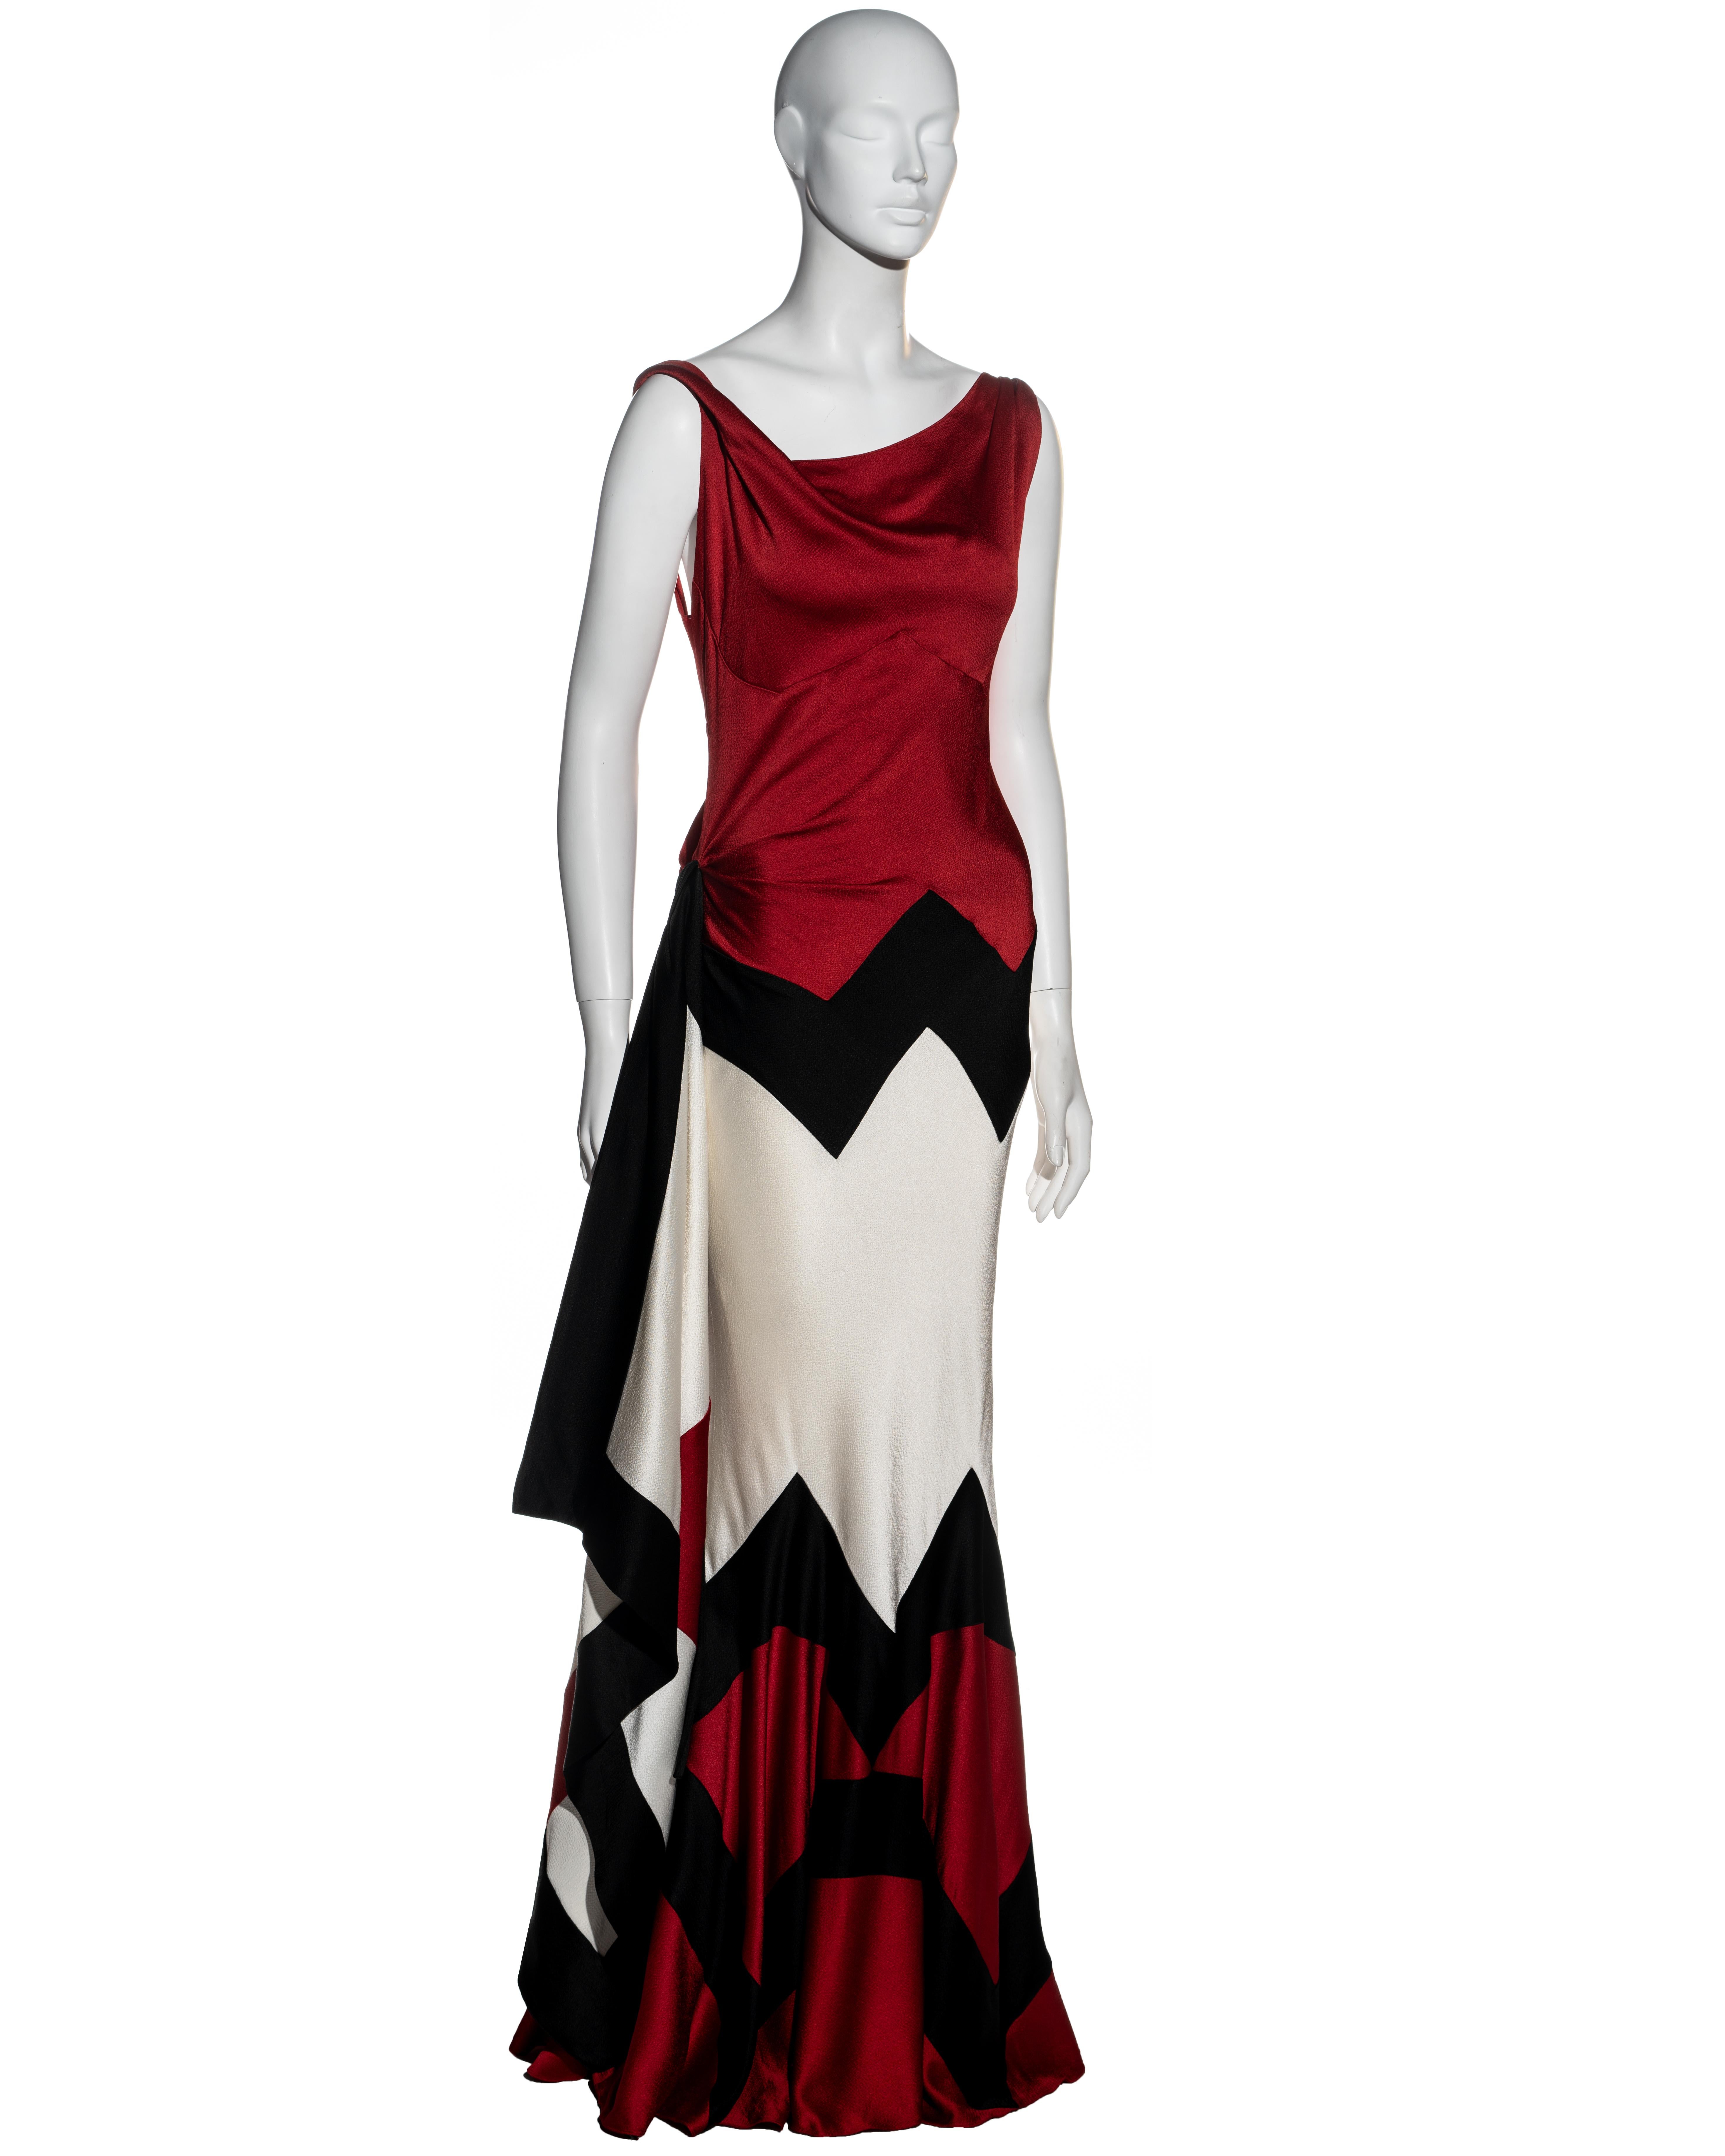 ▪ Christian Dior red, black and white evening dress 
▪ Designed by John Galliano
▪ Asymmetric cowl neckline
▪ Twisted shoulder strap 
▪ Asymmetric drapery on bodice 
▪ Low back 
▪ Hanging draped panel knotted at the hip 
▪ Colour palette inspired by